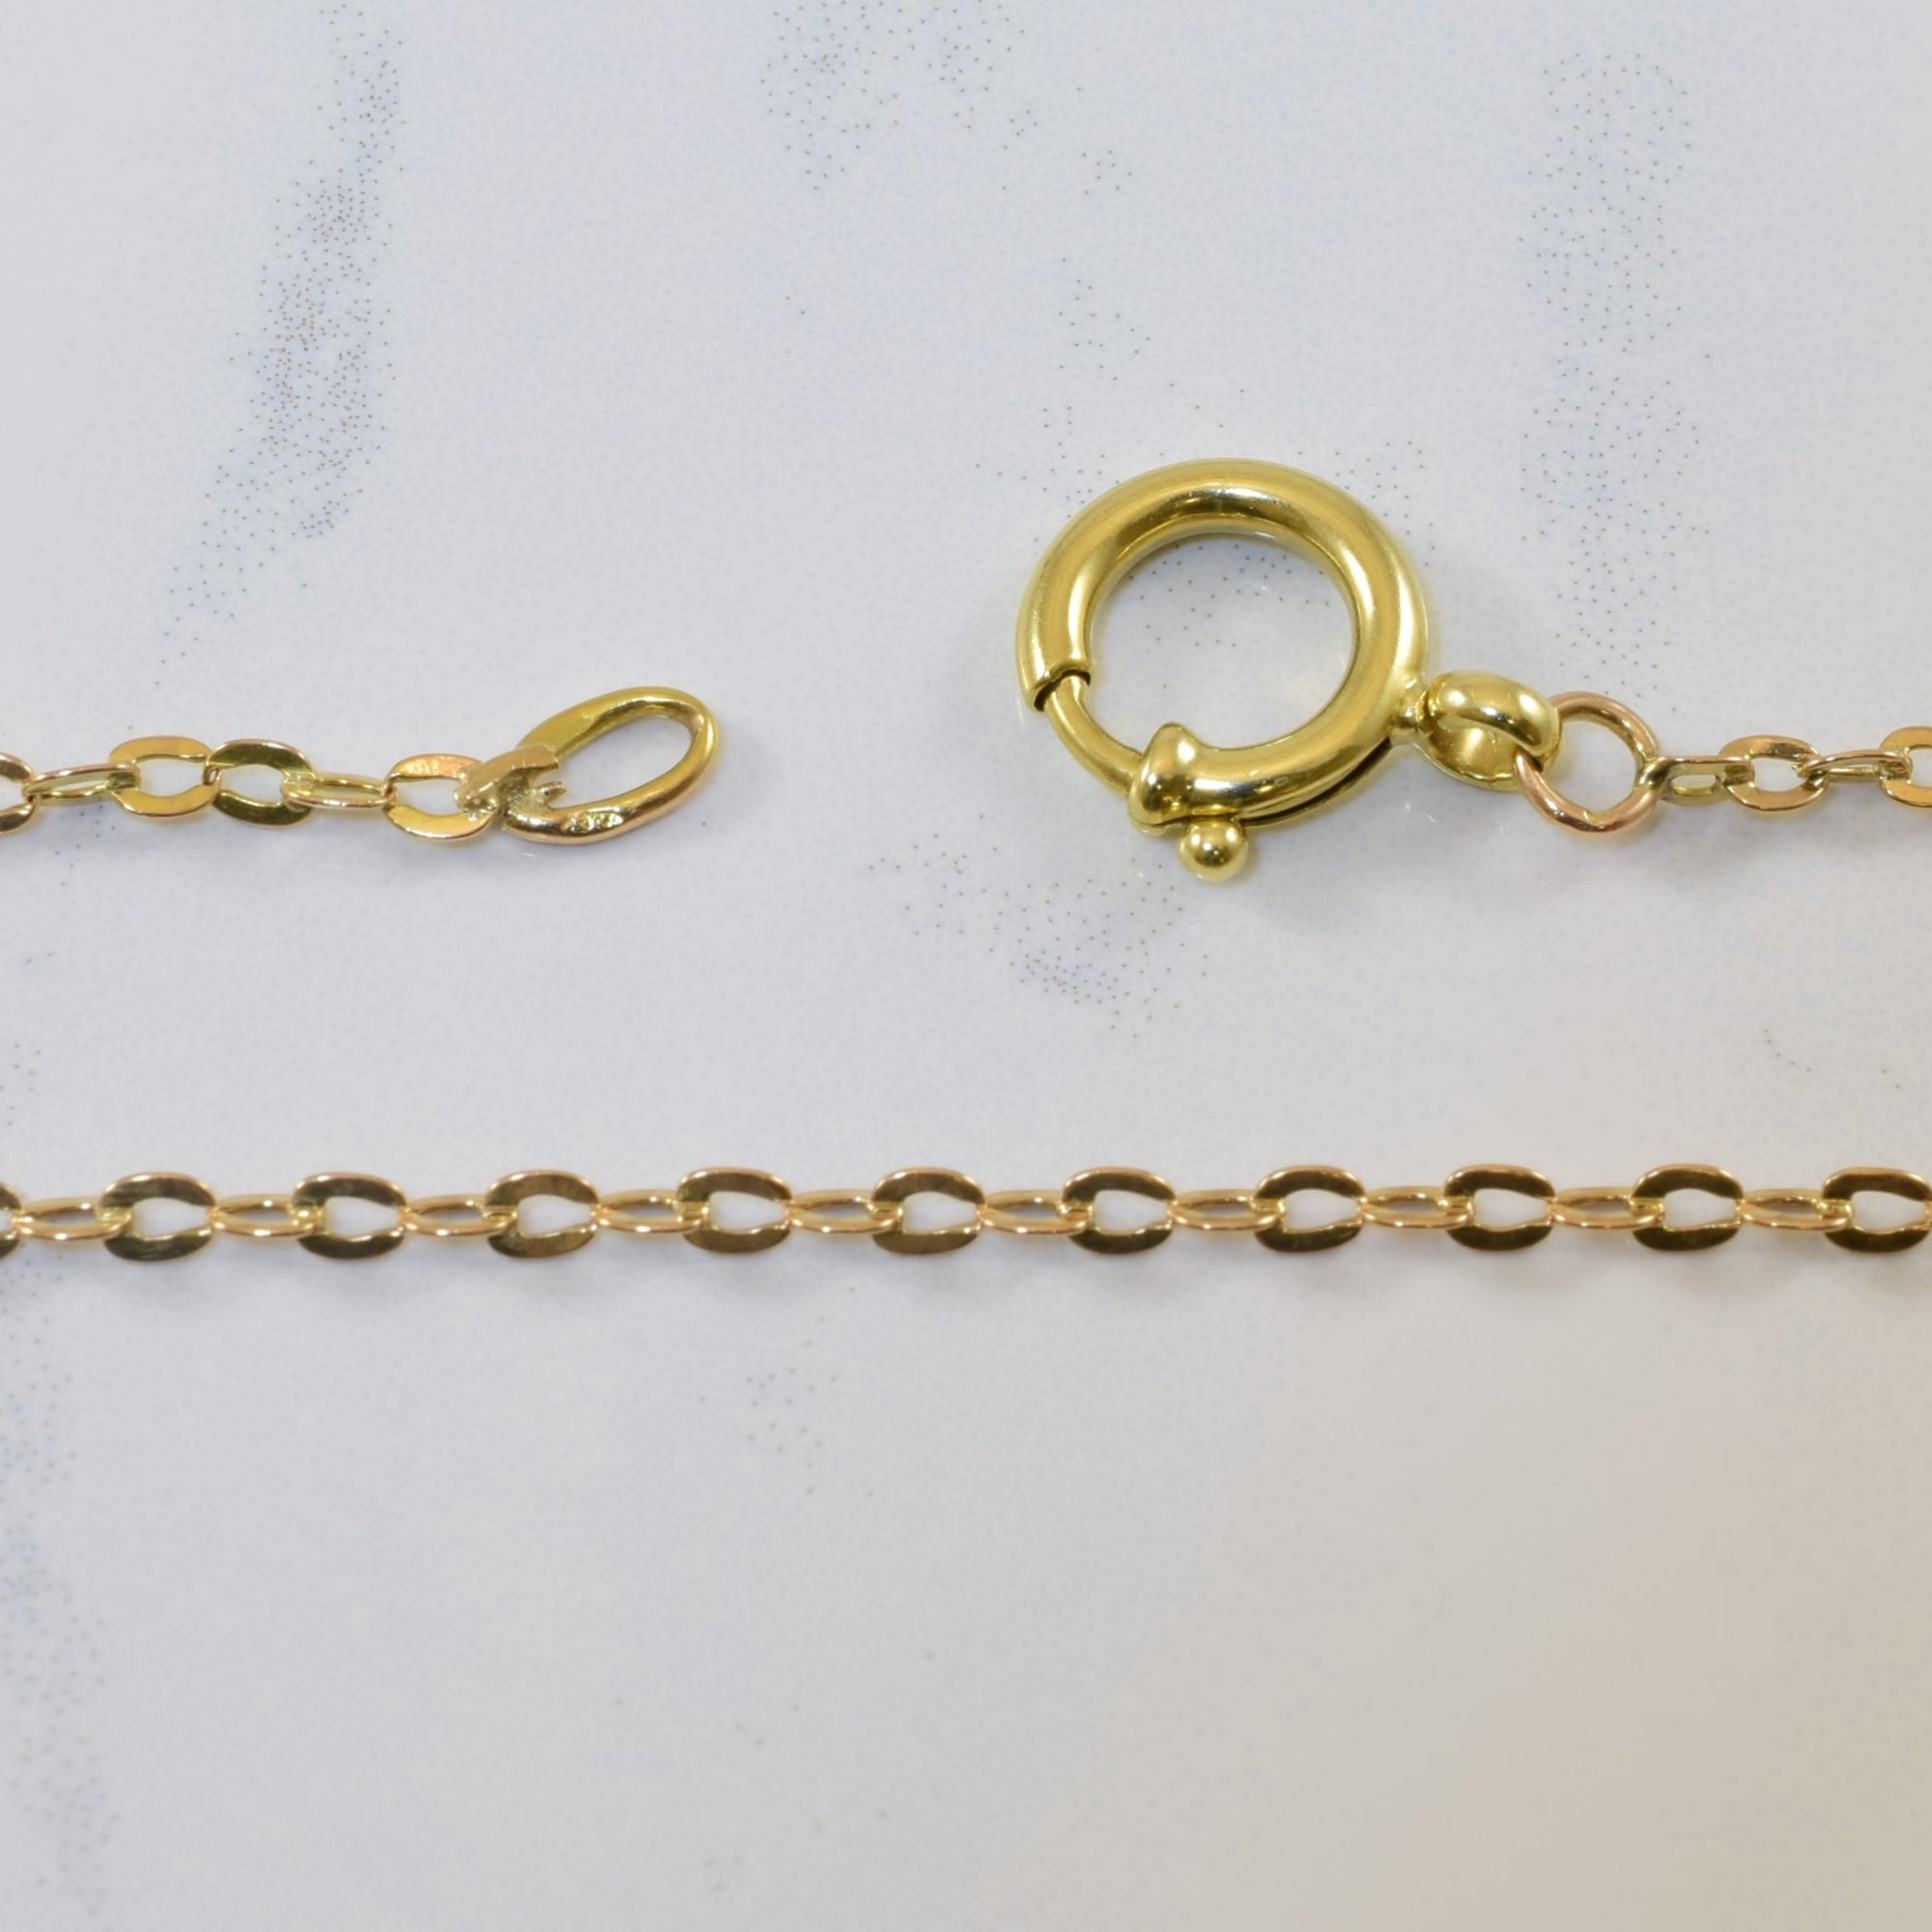 14k Yellow Gold Flat Link Cable Chain | 27